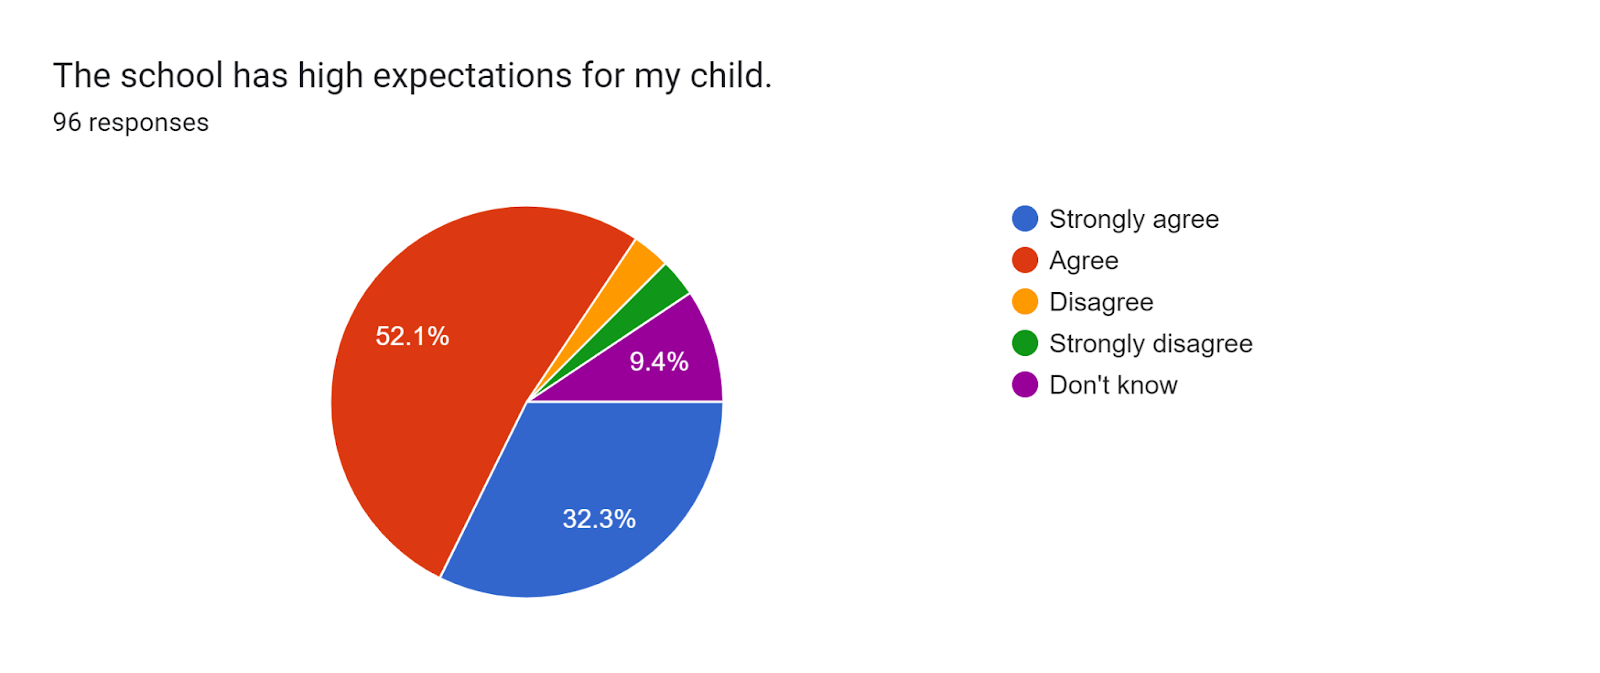 Forms response chart. Question title: The school has high expectations for my child.
. Number of responses: 96 responses.